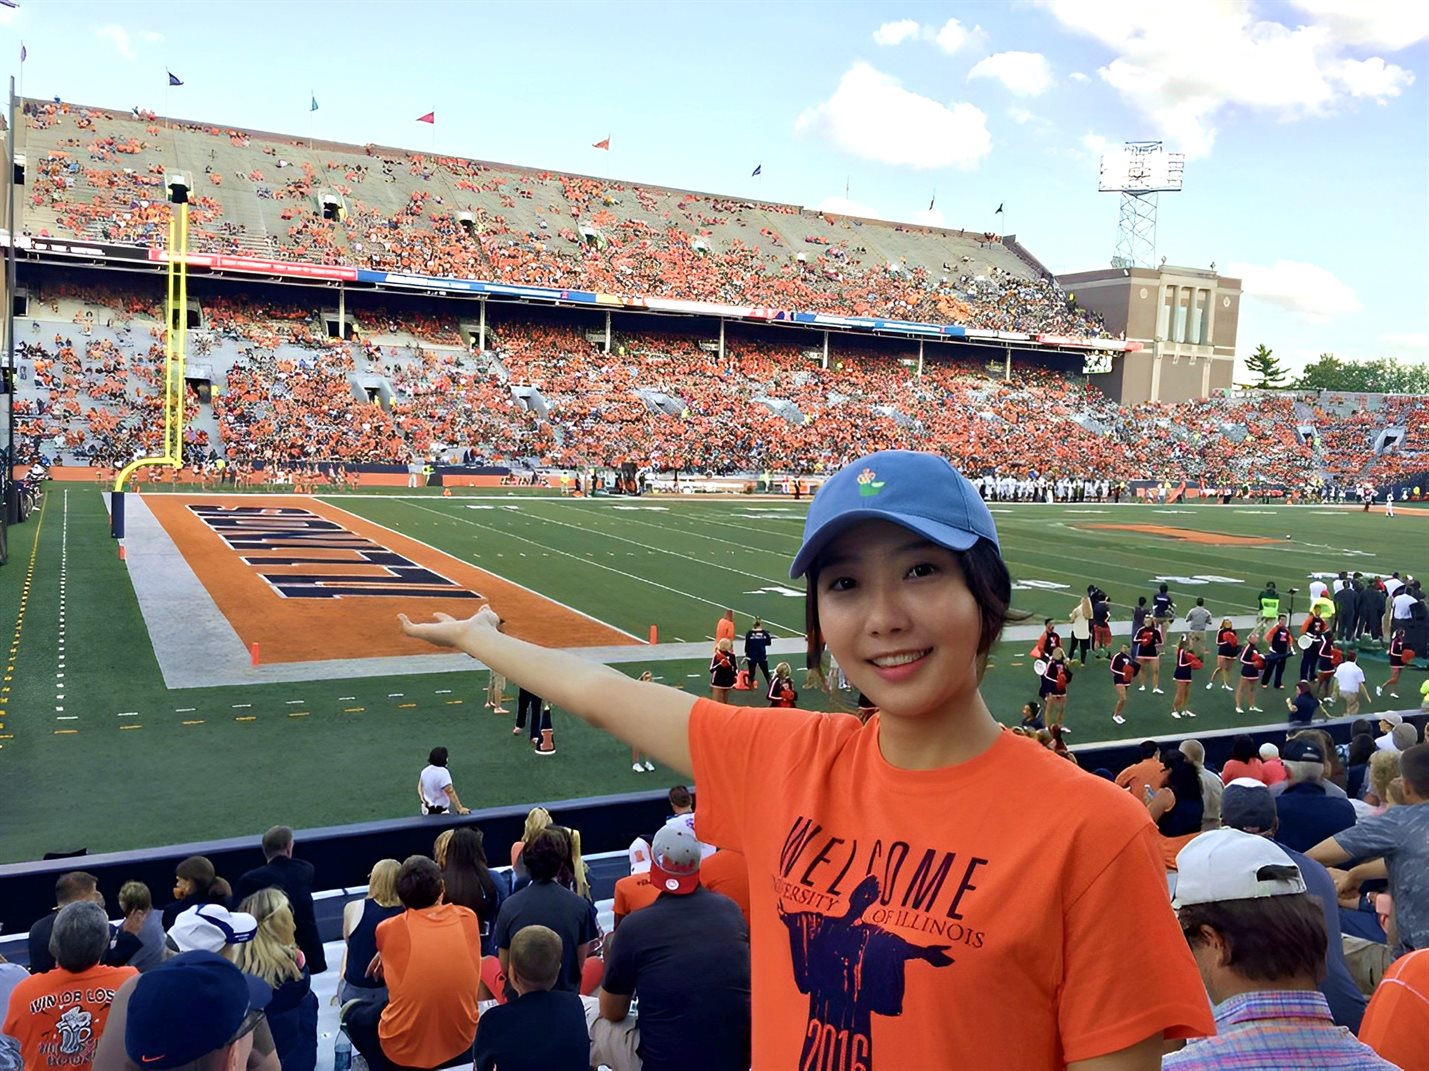 Ahyoung Kim attends her first Fighting Illini football game at Memorial Stadium in Champaign, Ill.